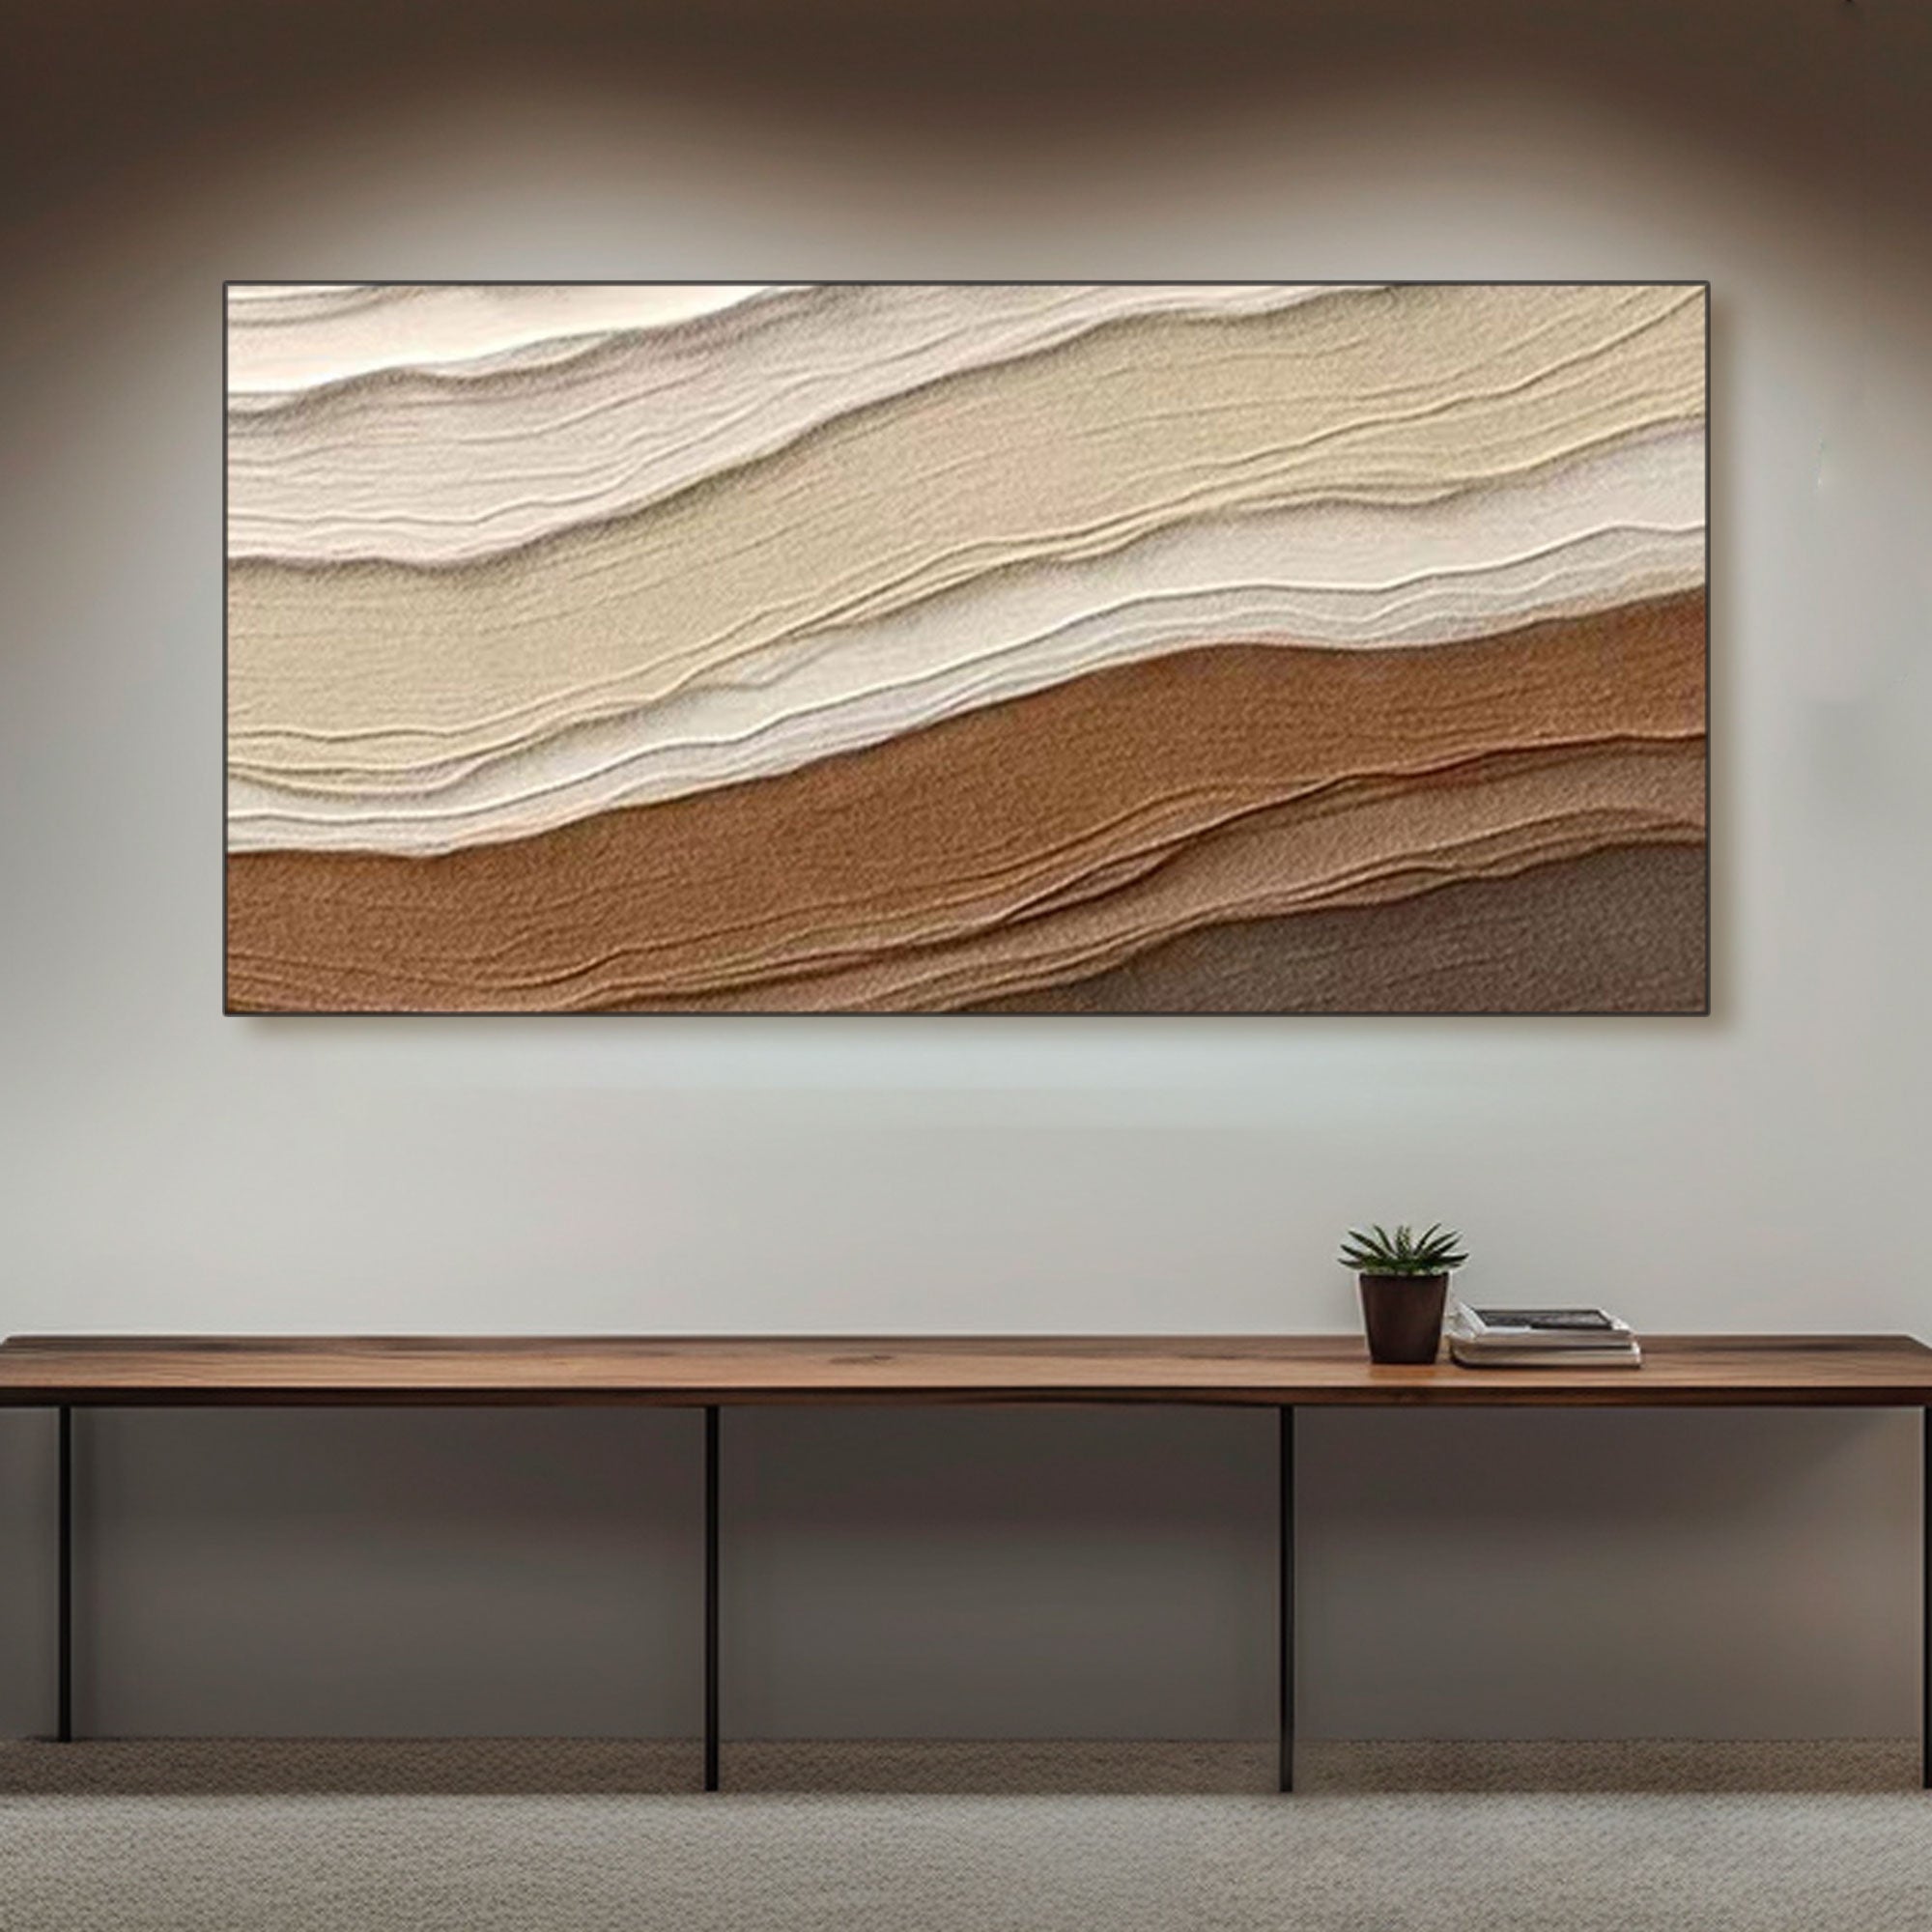 3D Textured Abstract Painting "Earthen Rhythms"